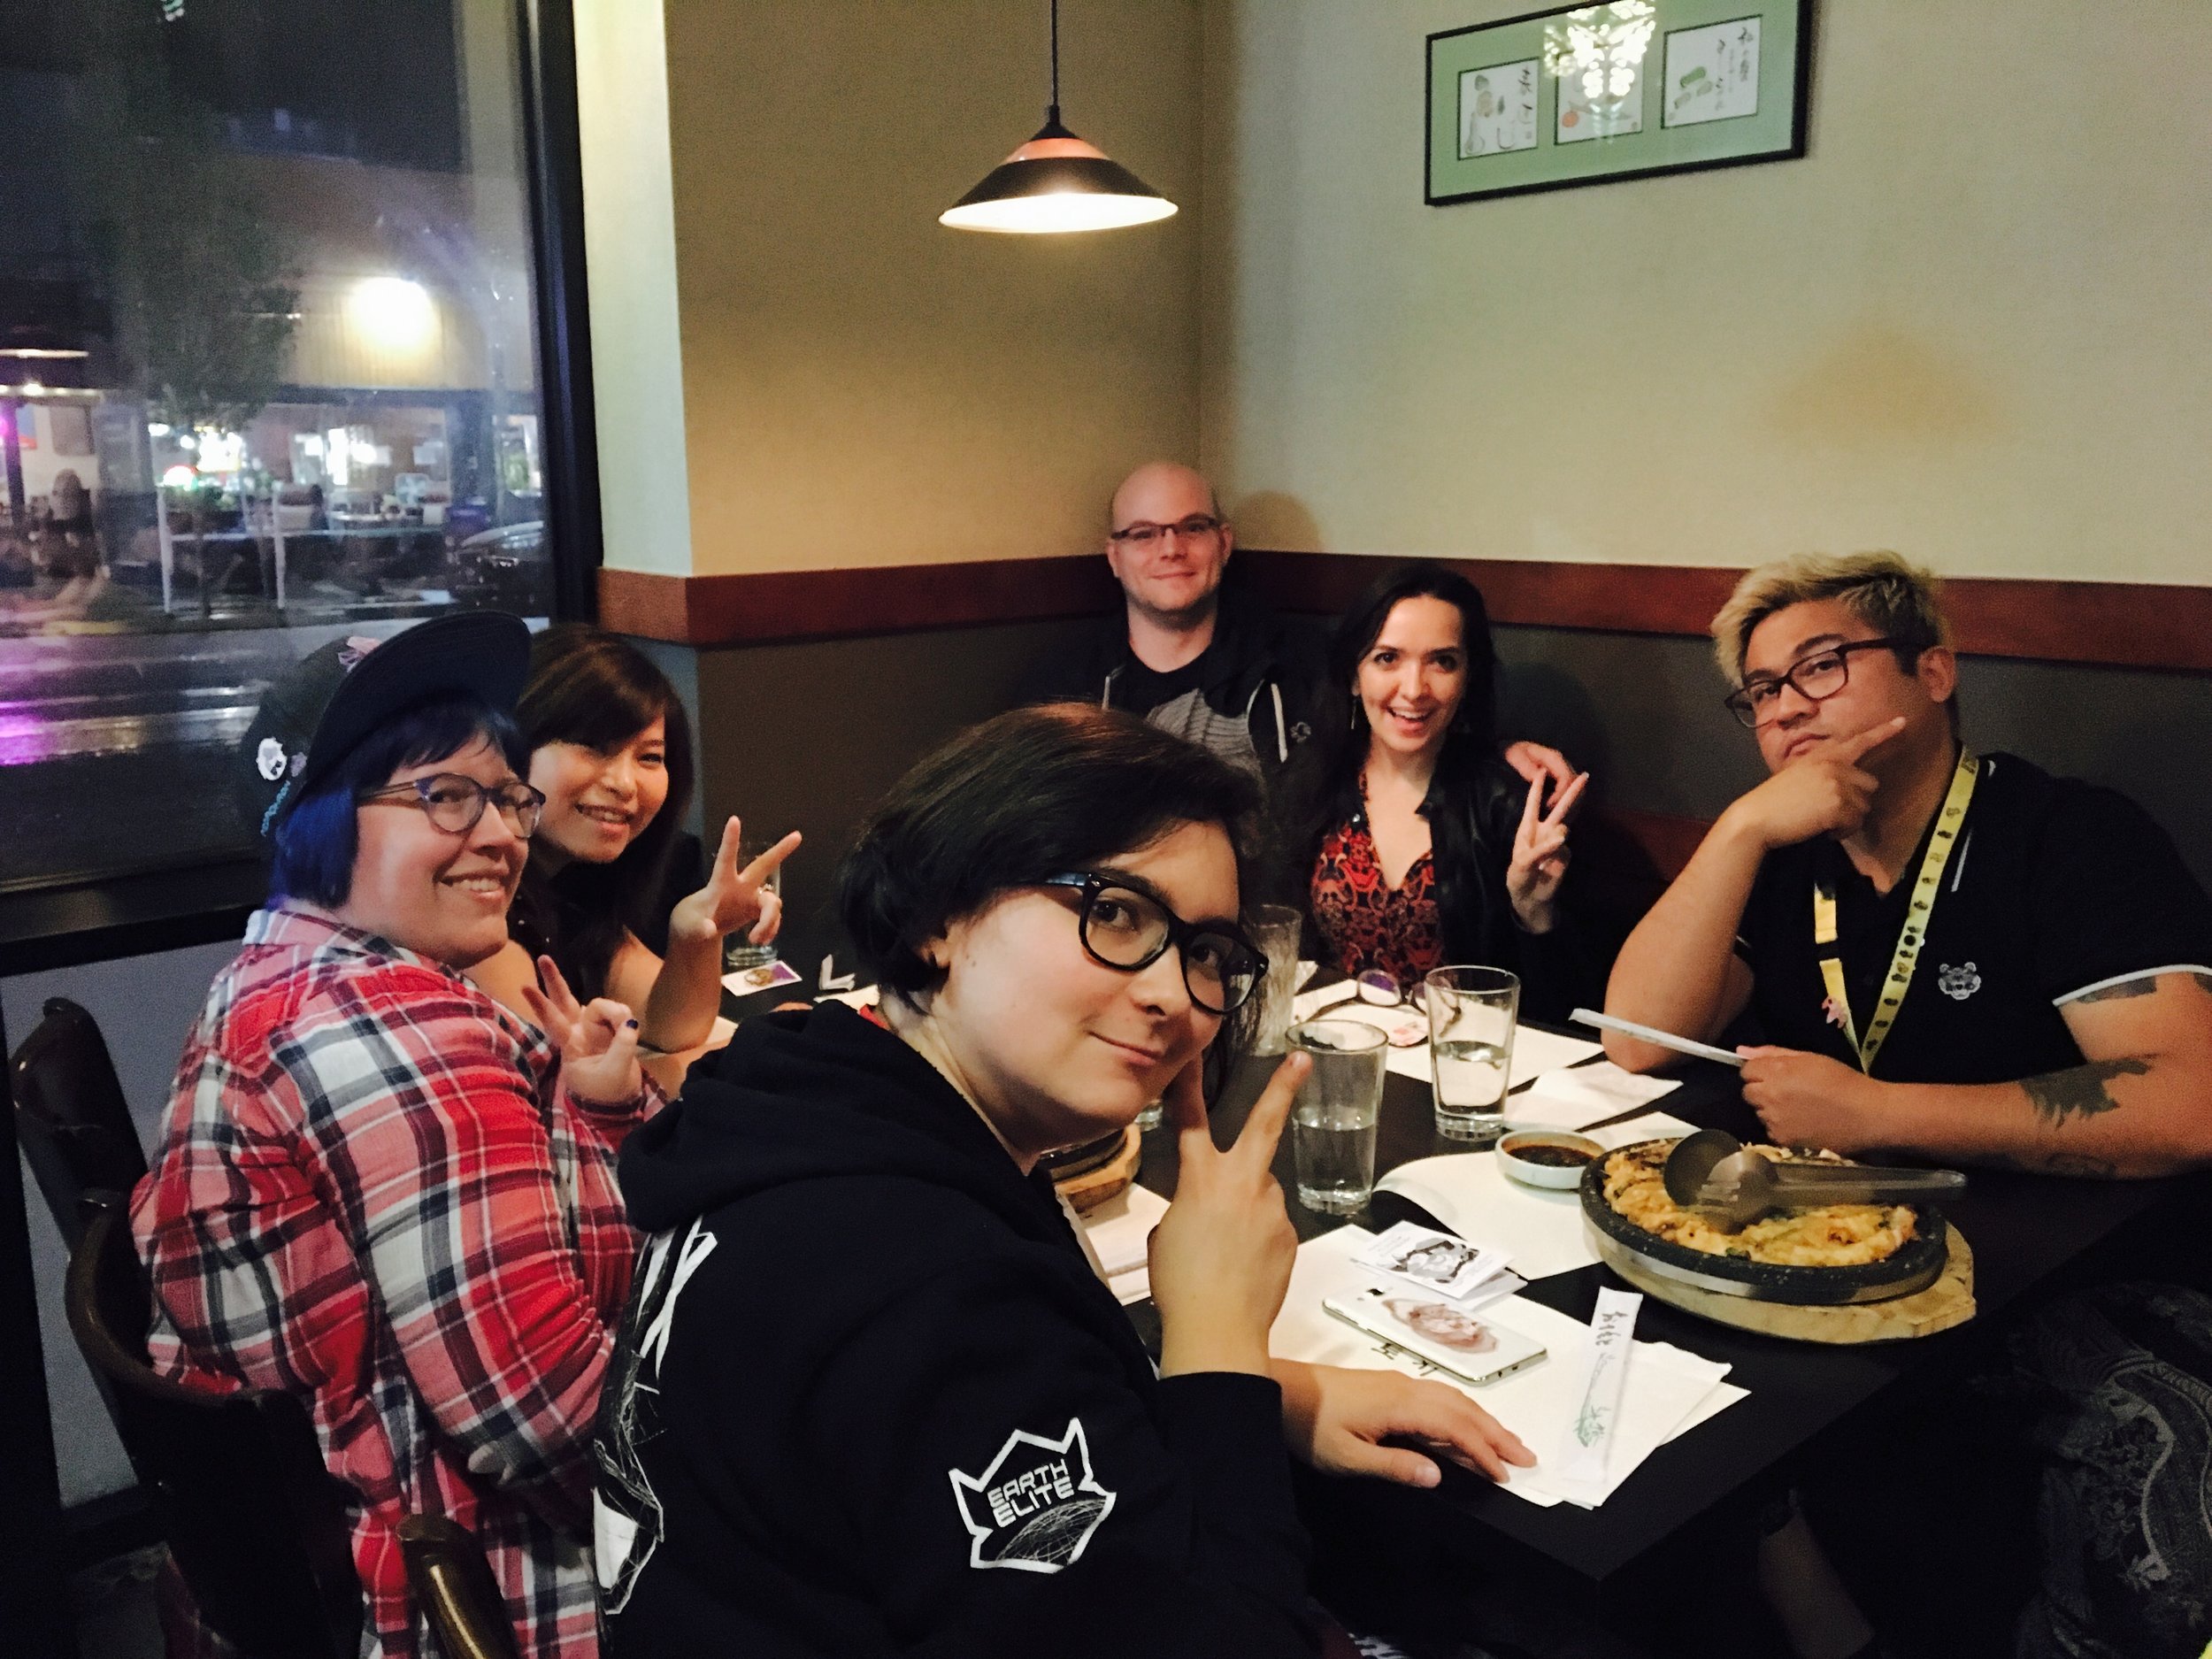 Post-convention dinner group